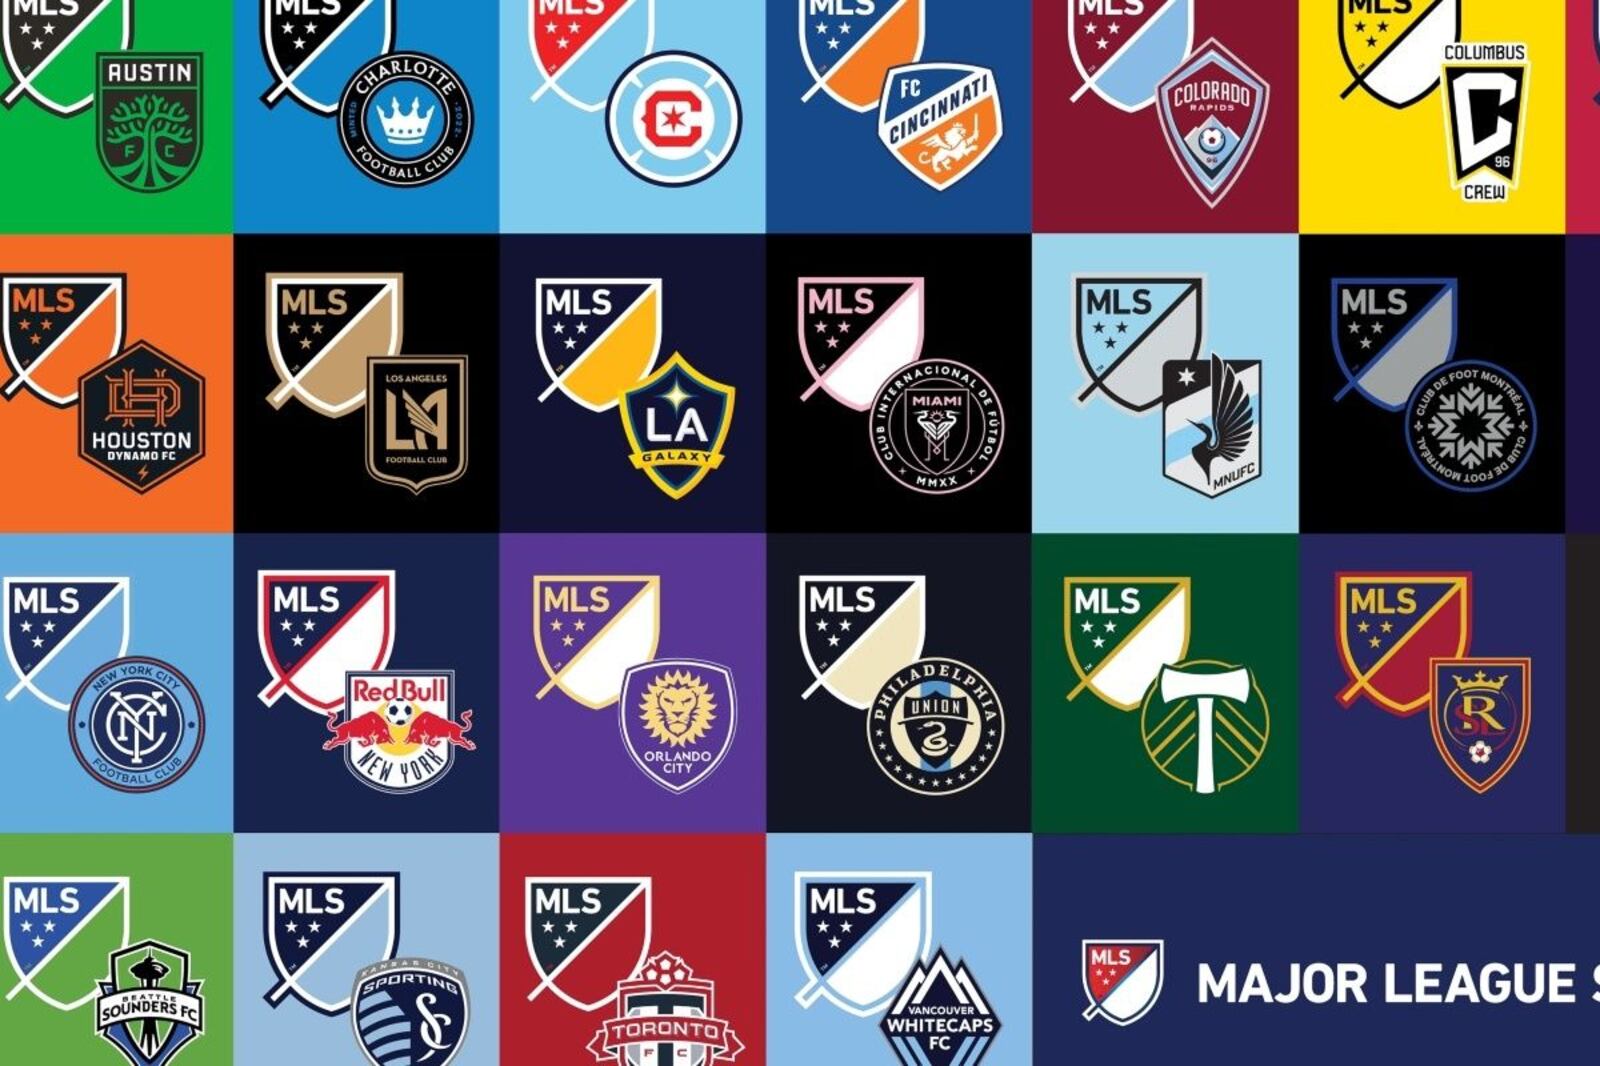 The team that the experts put together to win the Major League Soccer season